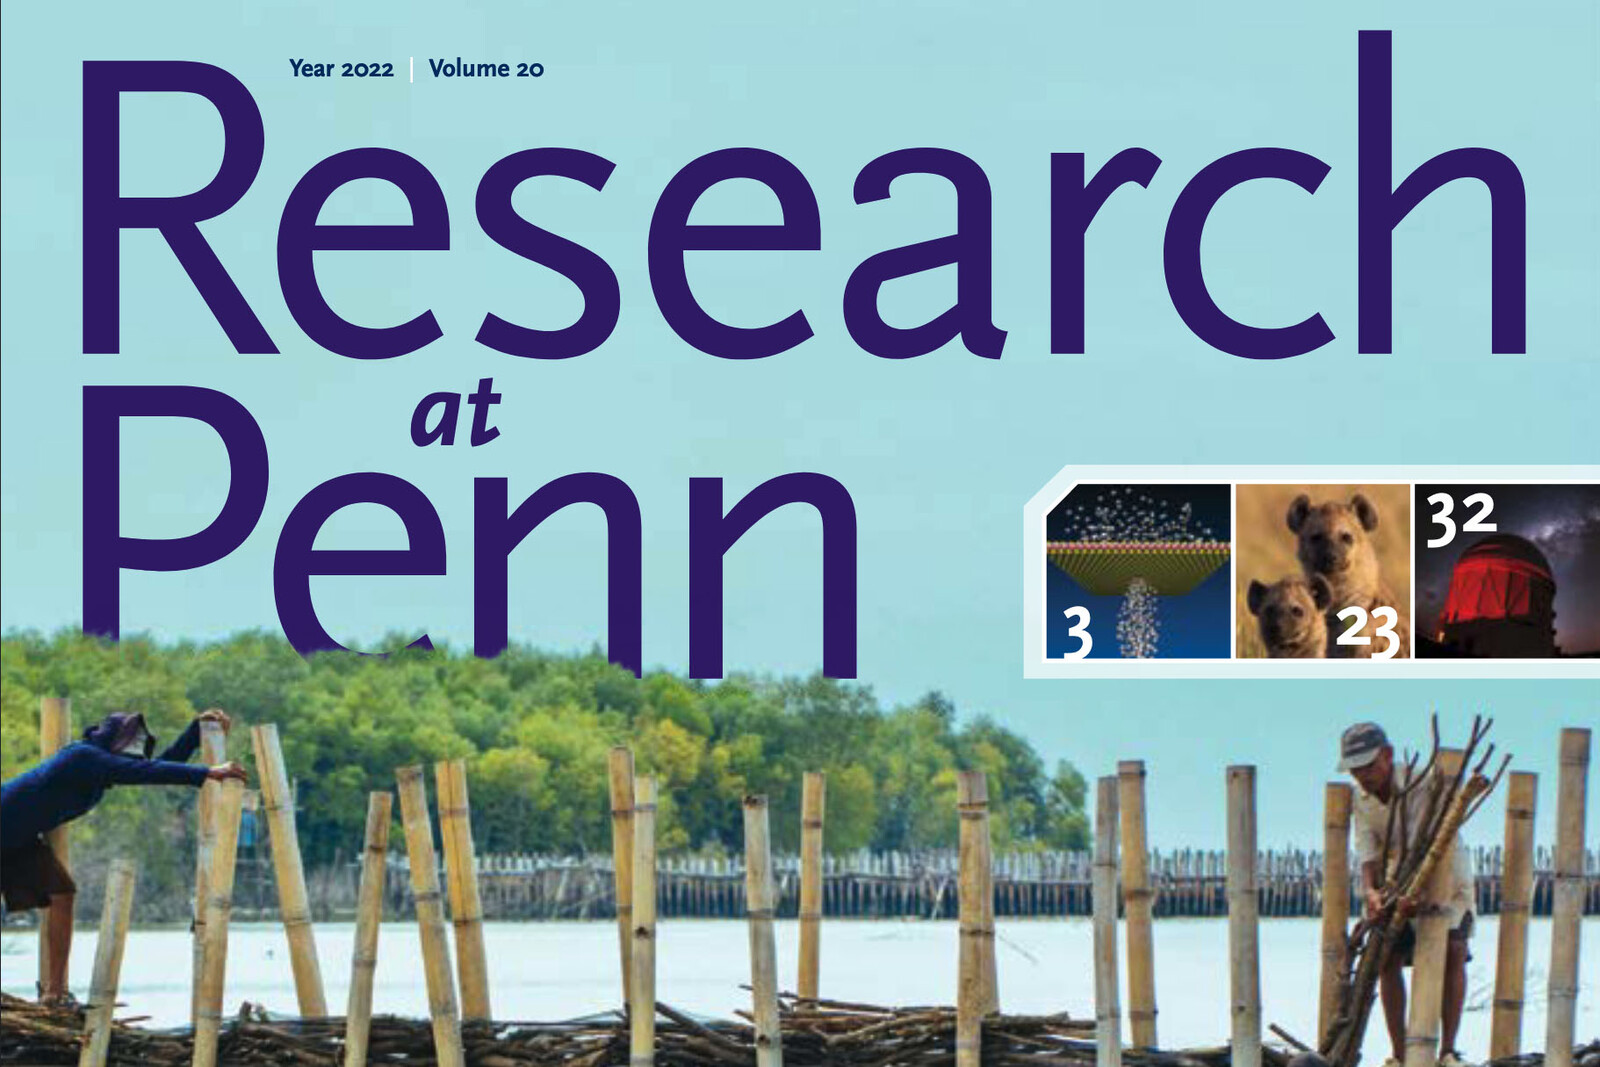 Screen capture of the cover of the Research at Penn publication